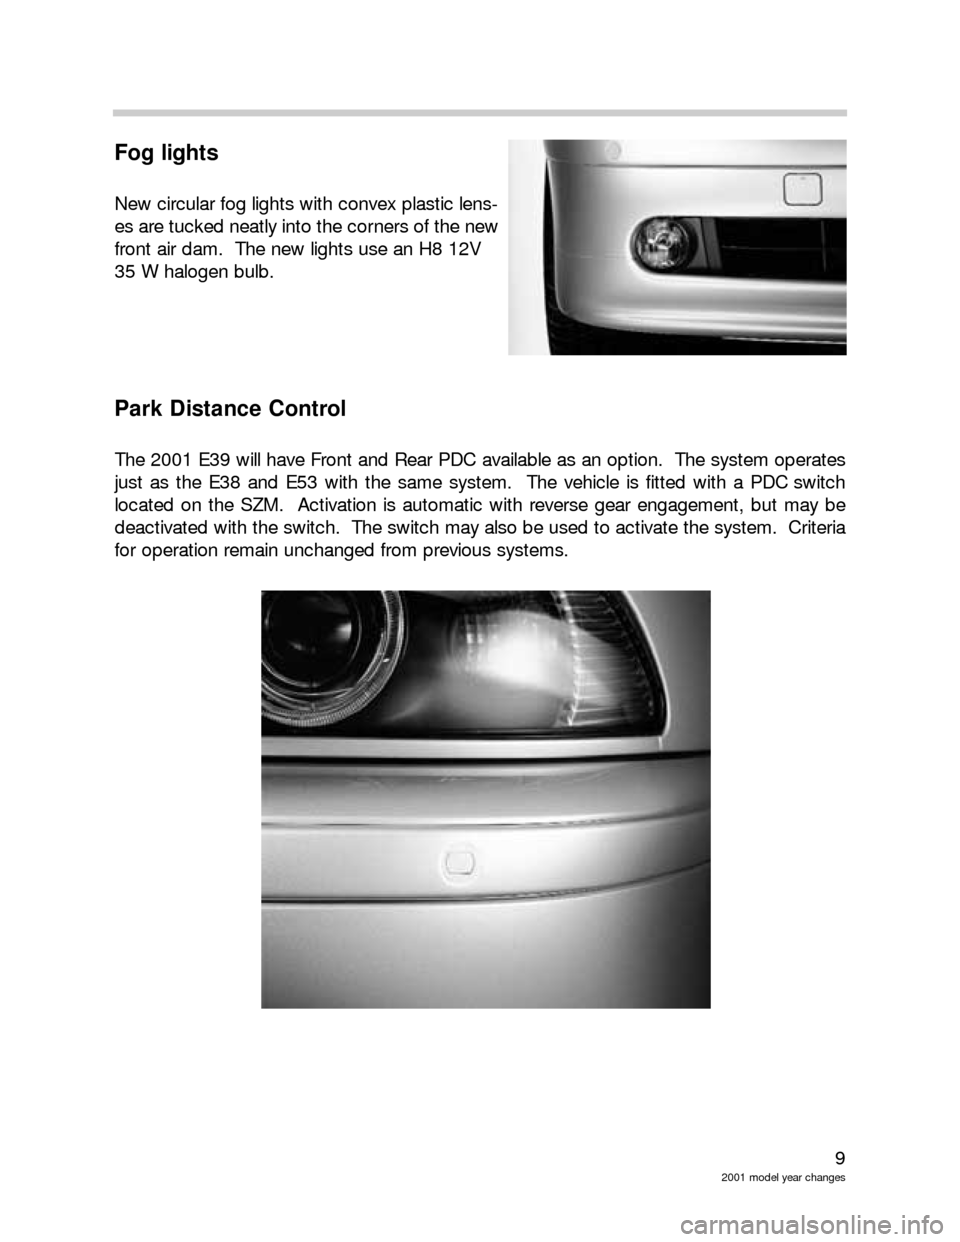 BMW X5 2004 E53 Model Yar Changes 9
2001 model year changes
Fog lights
New circular fog lights with convex plastic lens-
es are tucked neatly into the corners of the new
front air dam.  The new lights use an H8 12V 
35 W halogen bulb.